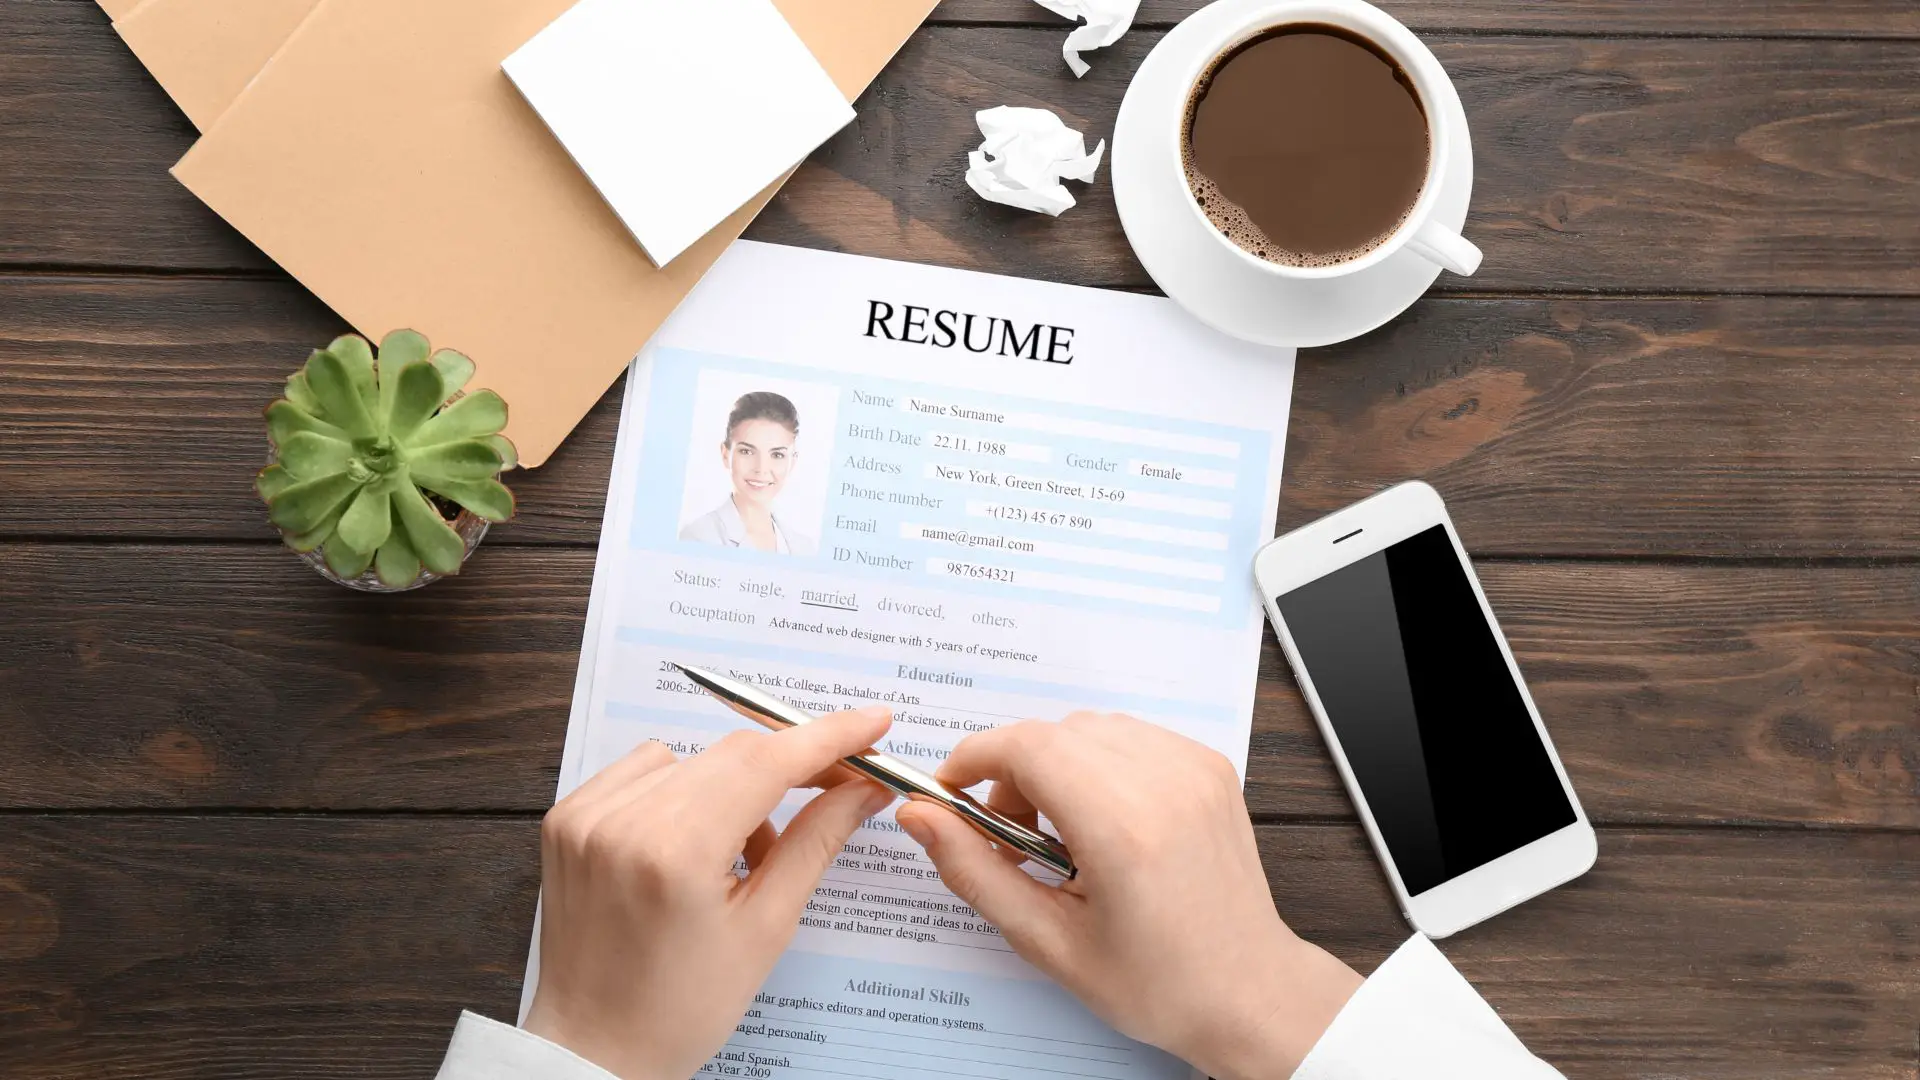 Crafting an ATS-Friendly Resume for Job Success